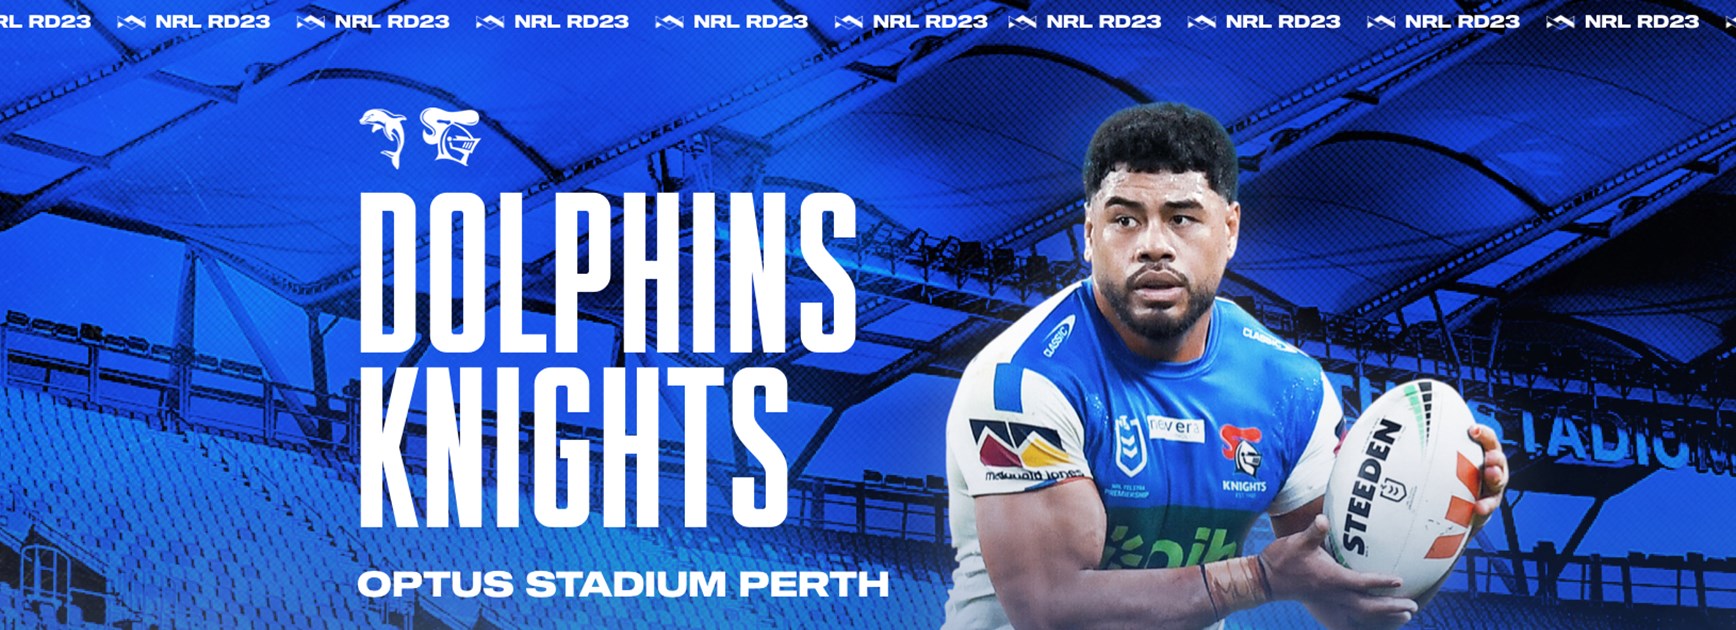 Defend the Kingdom: NRL Round 23 preview